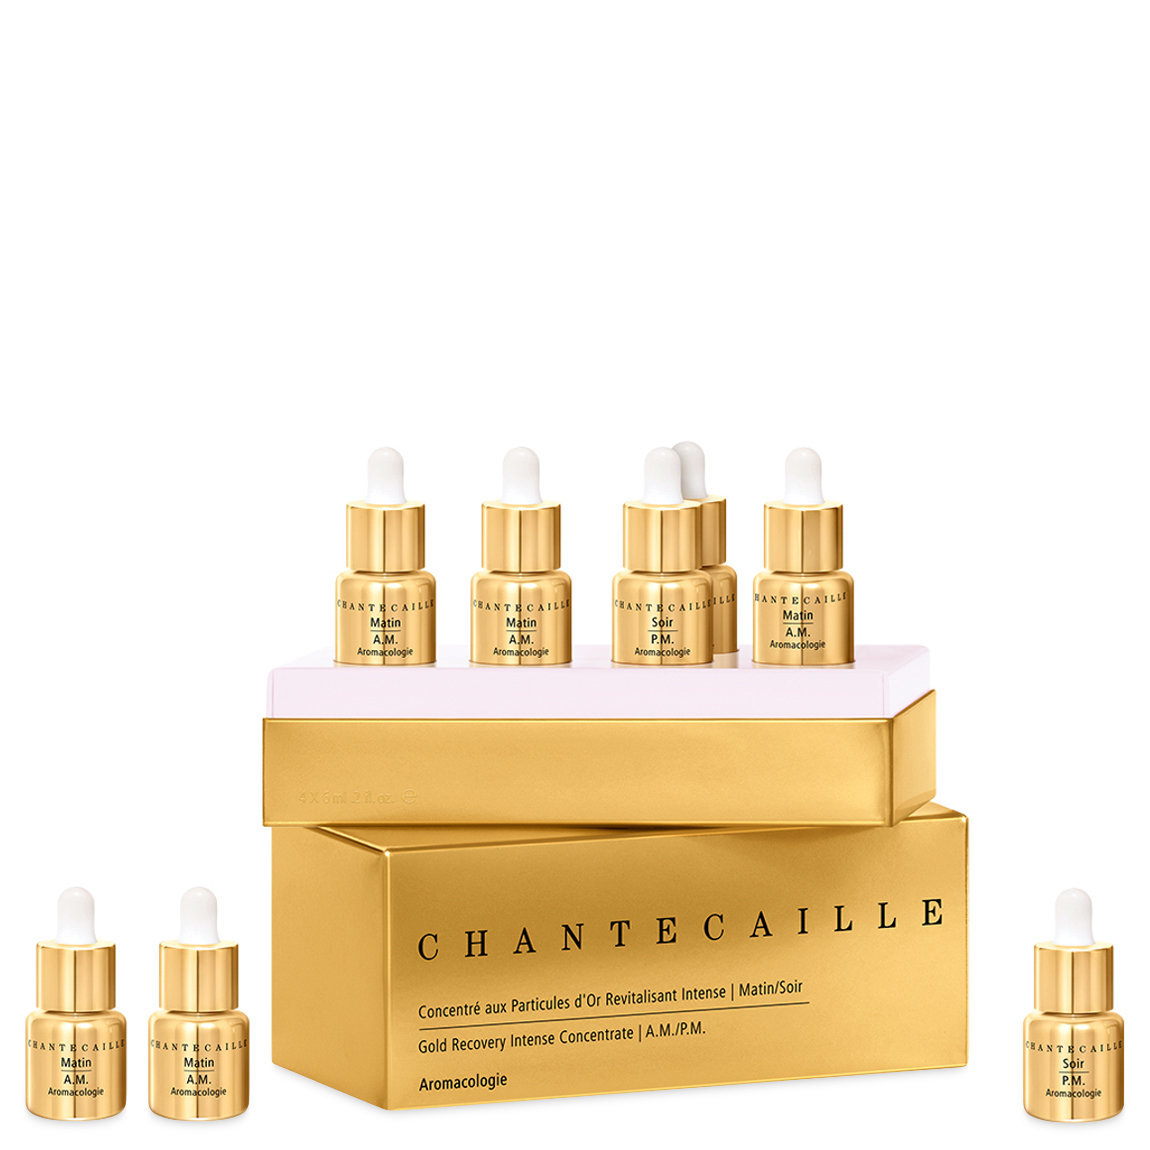 Chantecaille Gold Recovery Intense Concentrate X4 AM/PM alternative view 1 - product swatch.